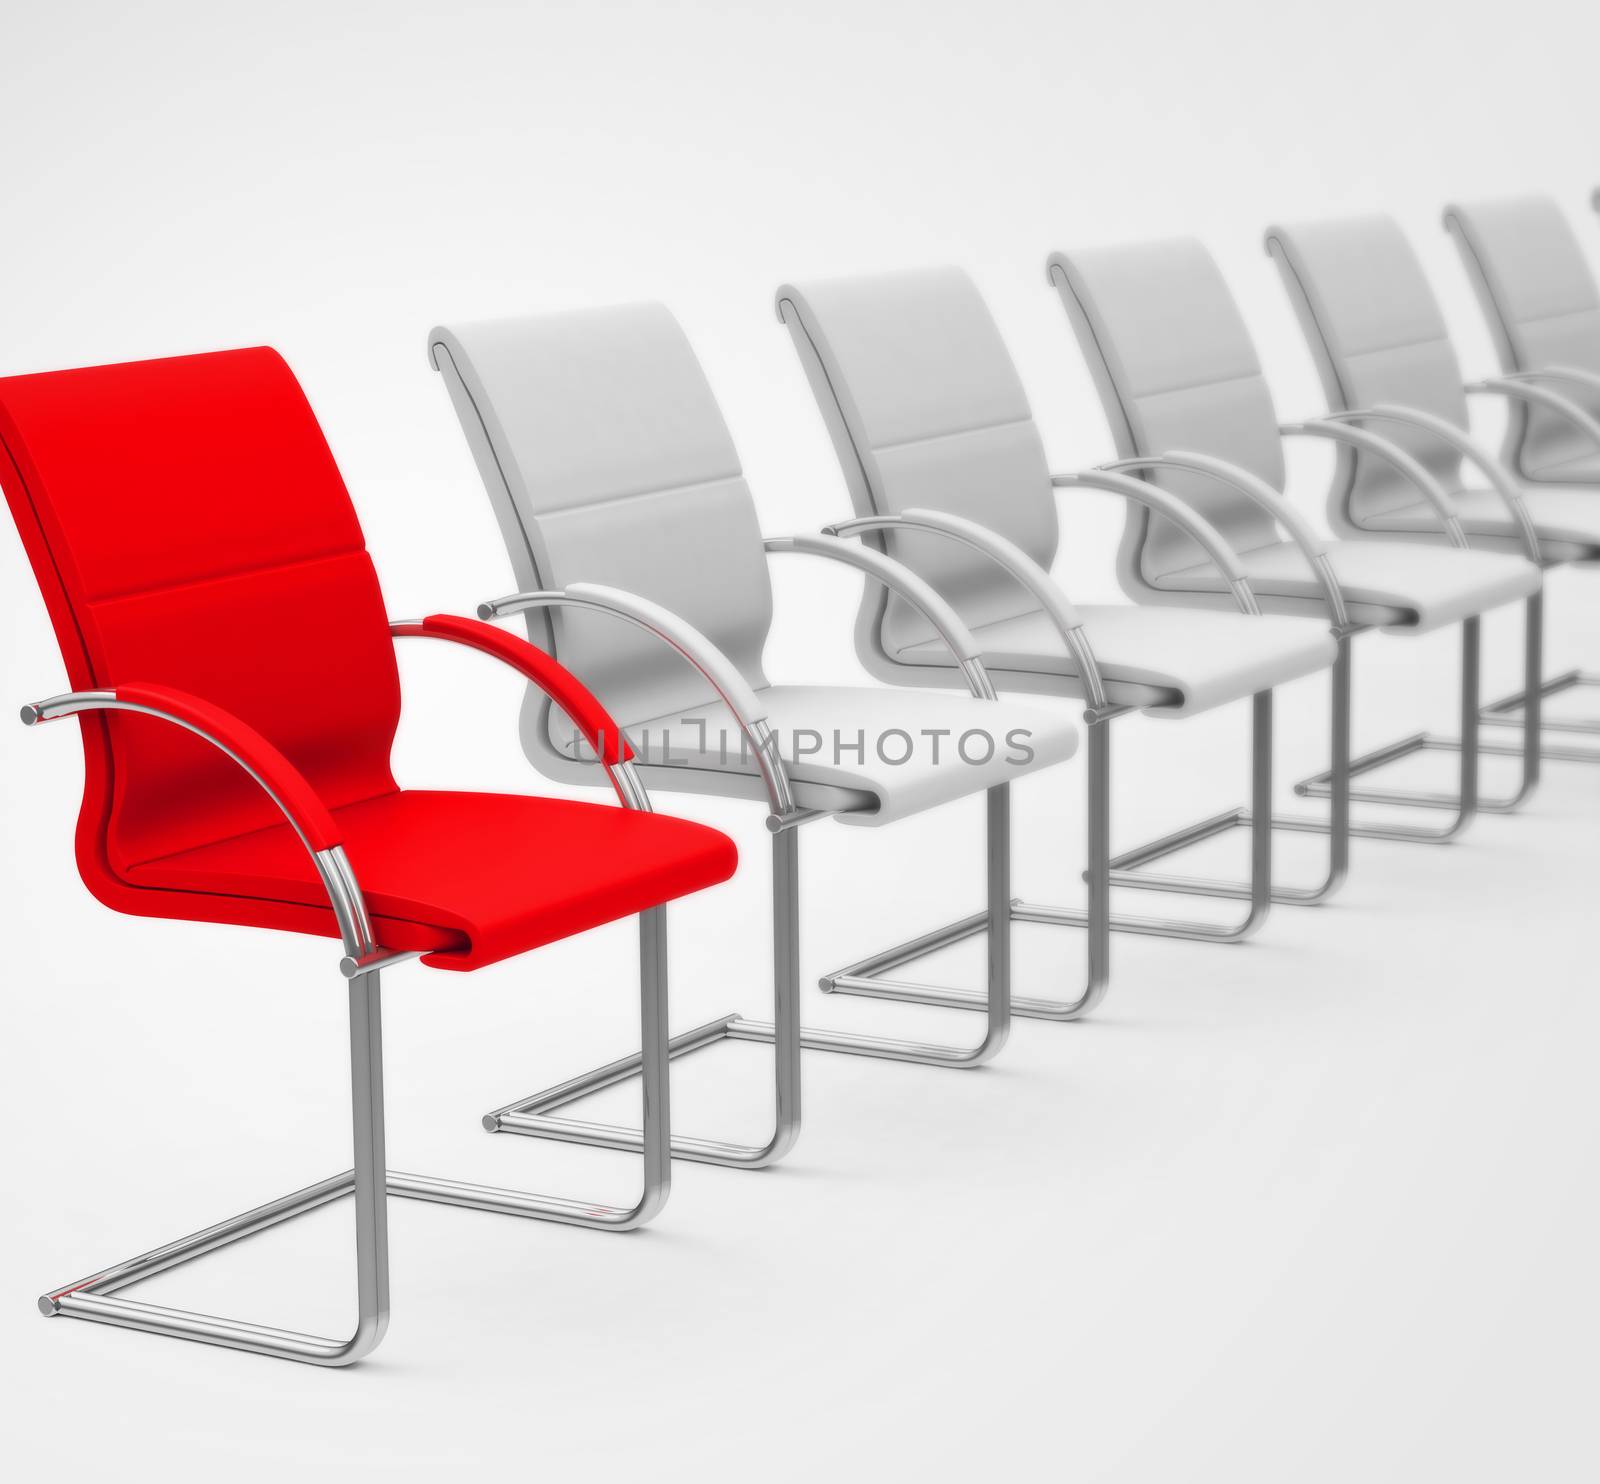 3d generated picture of a red chair in a row of white